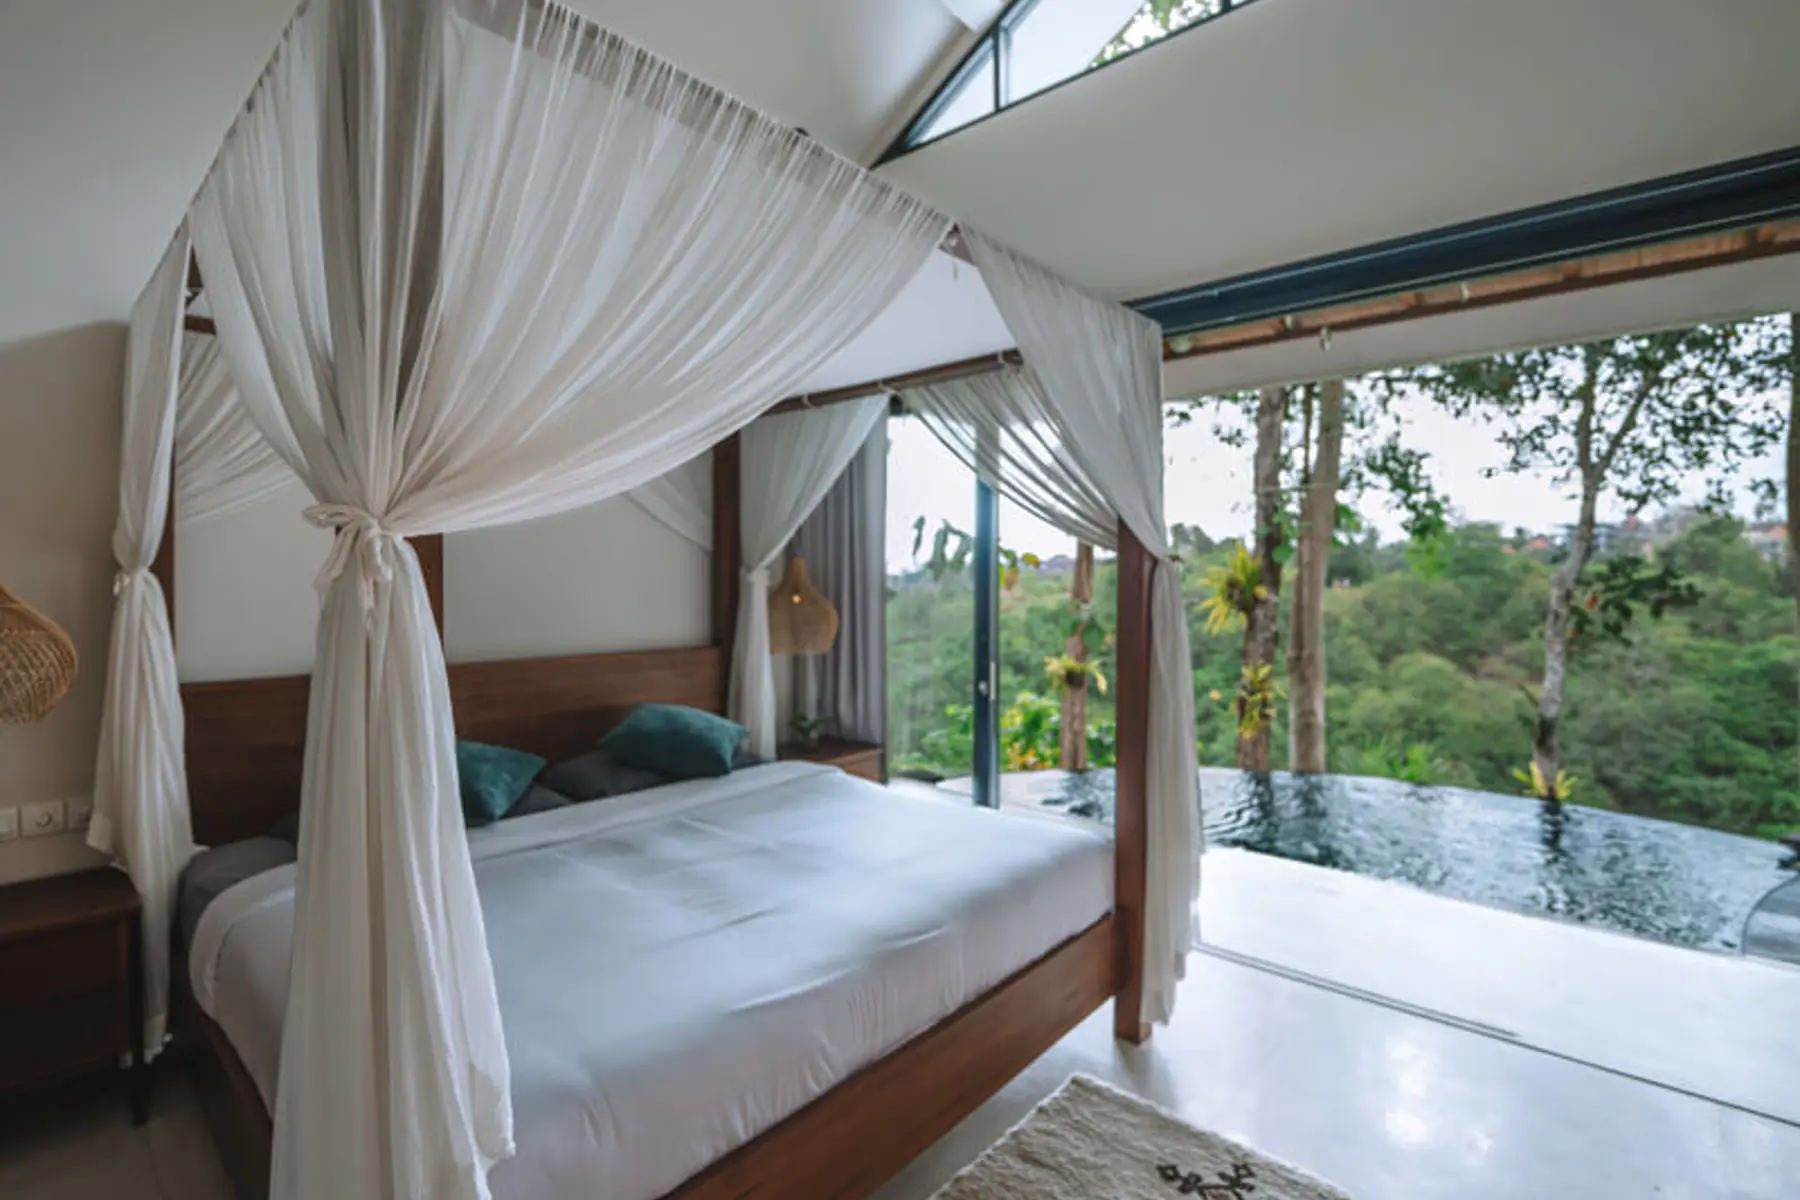 home swap tips remote workers - home swap in bali